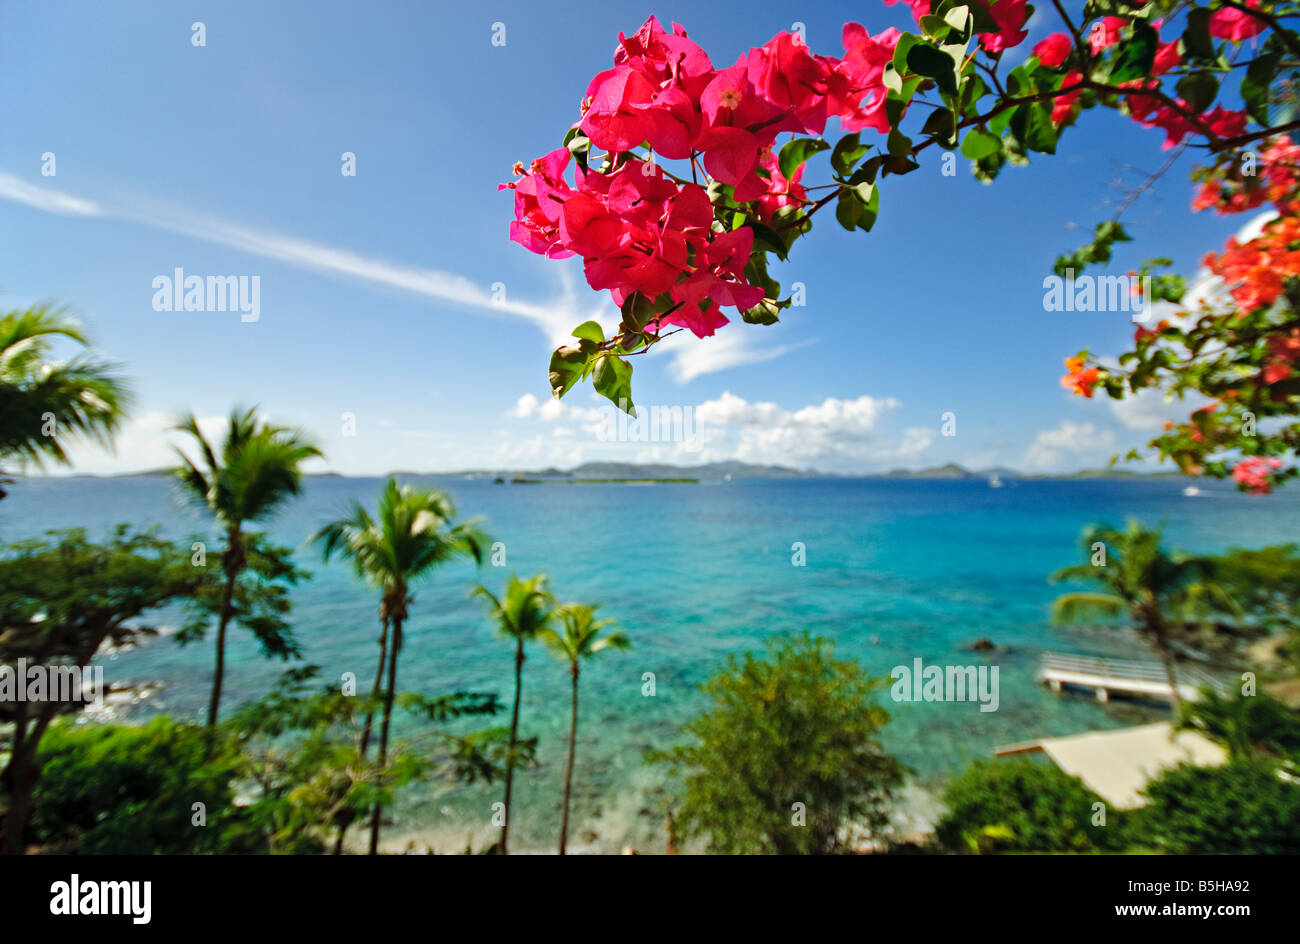 ST JOHN, US Virgin Islands - A view out over clear Caribbean waters looking toward St Thomas from St John in the US Virgin Islands, with tropical pink flowers at right and palm trees at left. Stock Photo